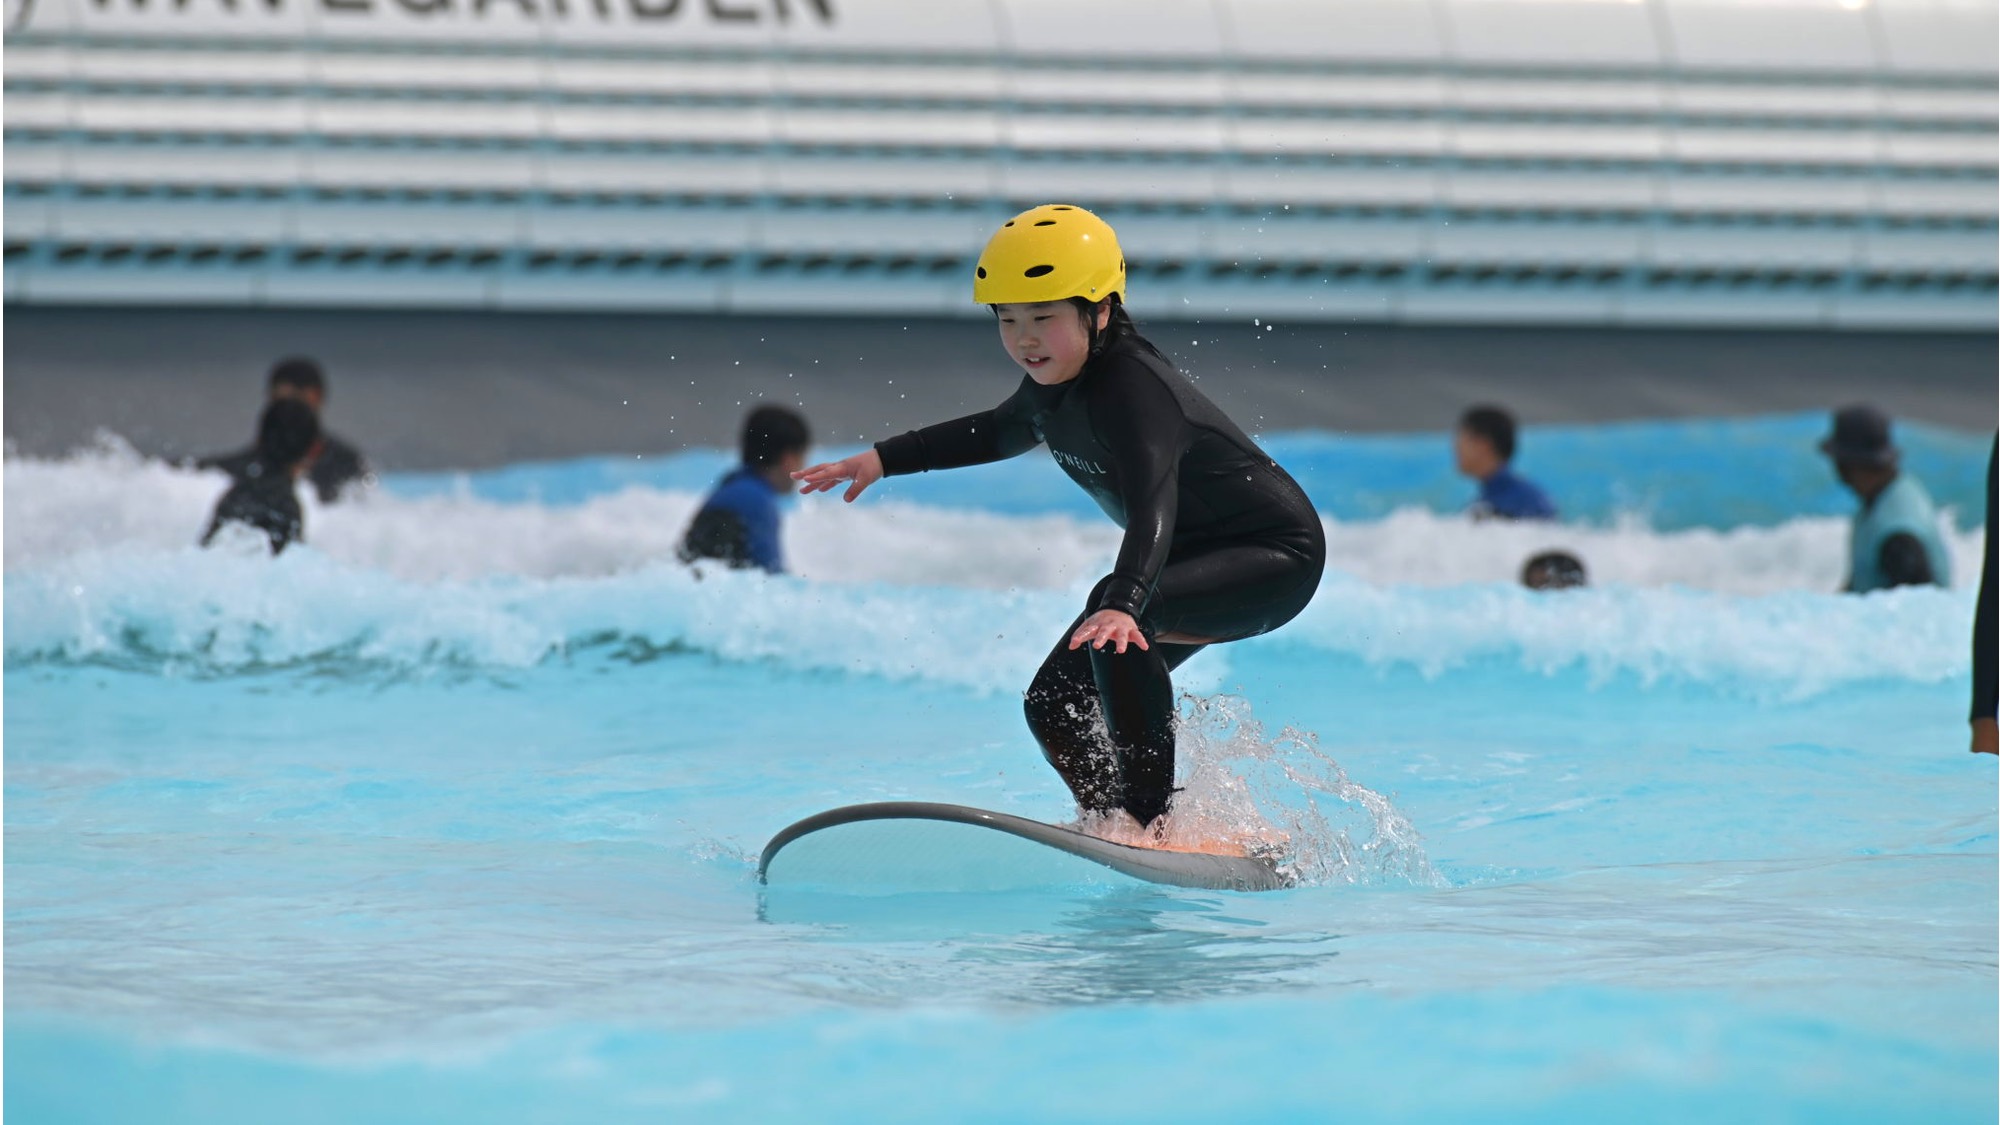 learning to surf at wave park in south korea